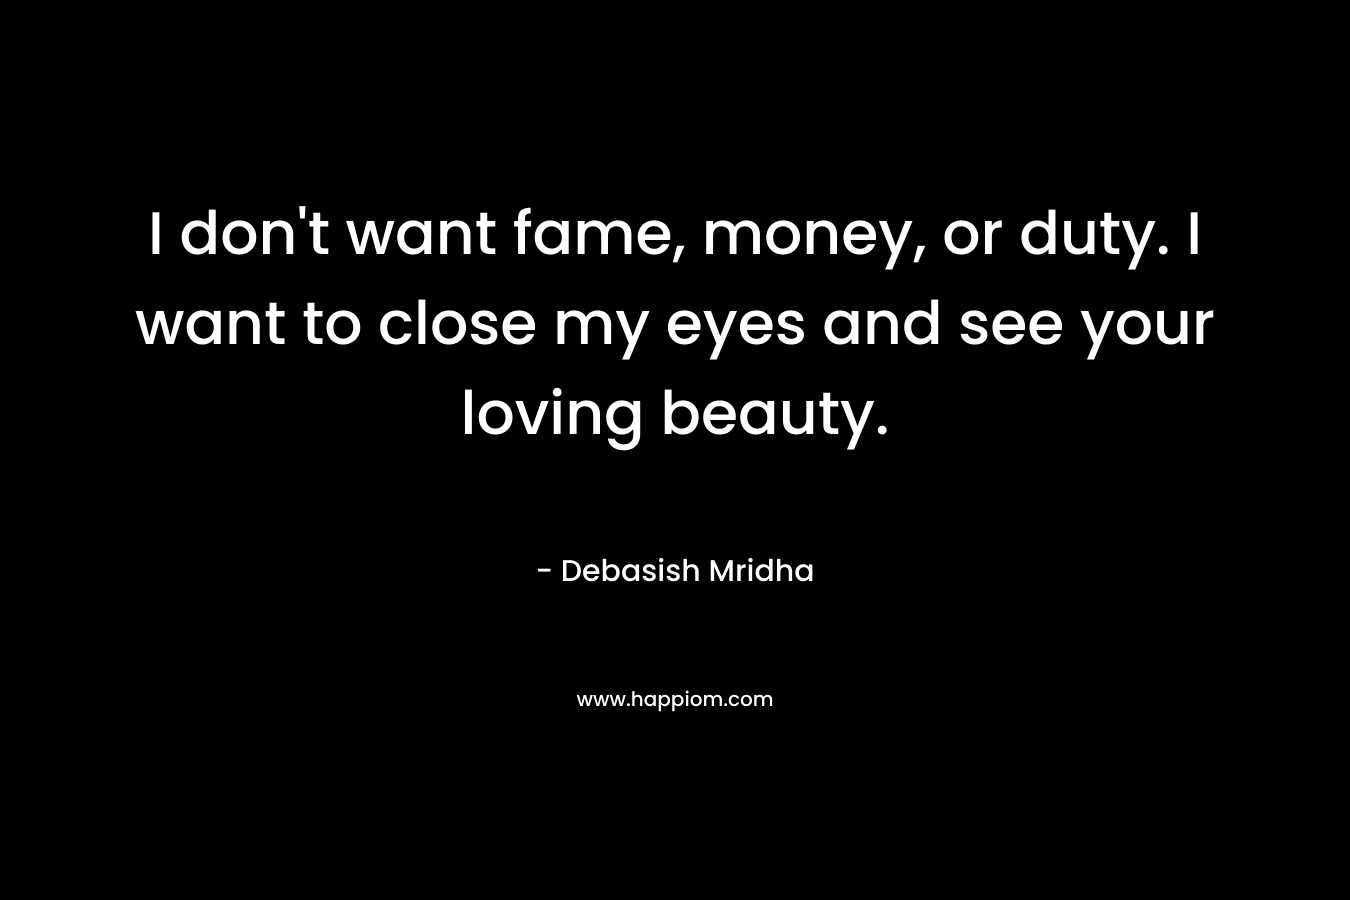 I don't want fame, money, or duty. I want to close my eyes and see your loving beauty.